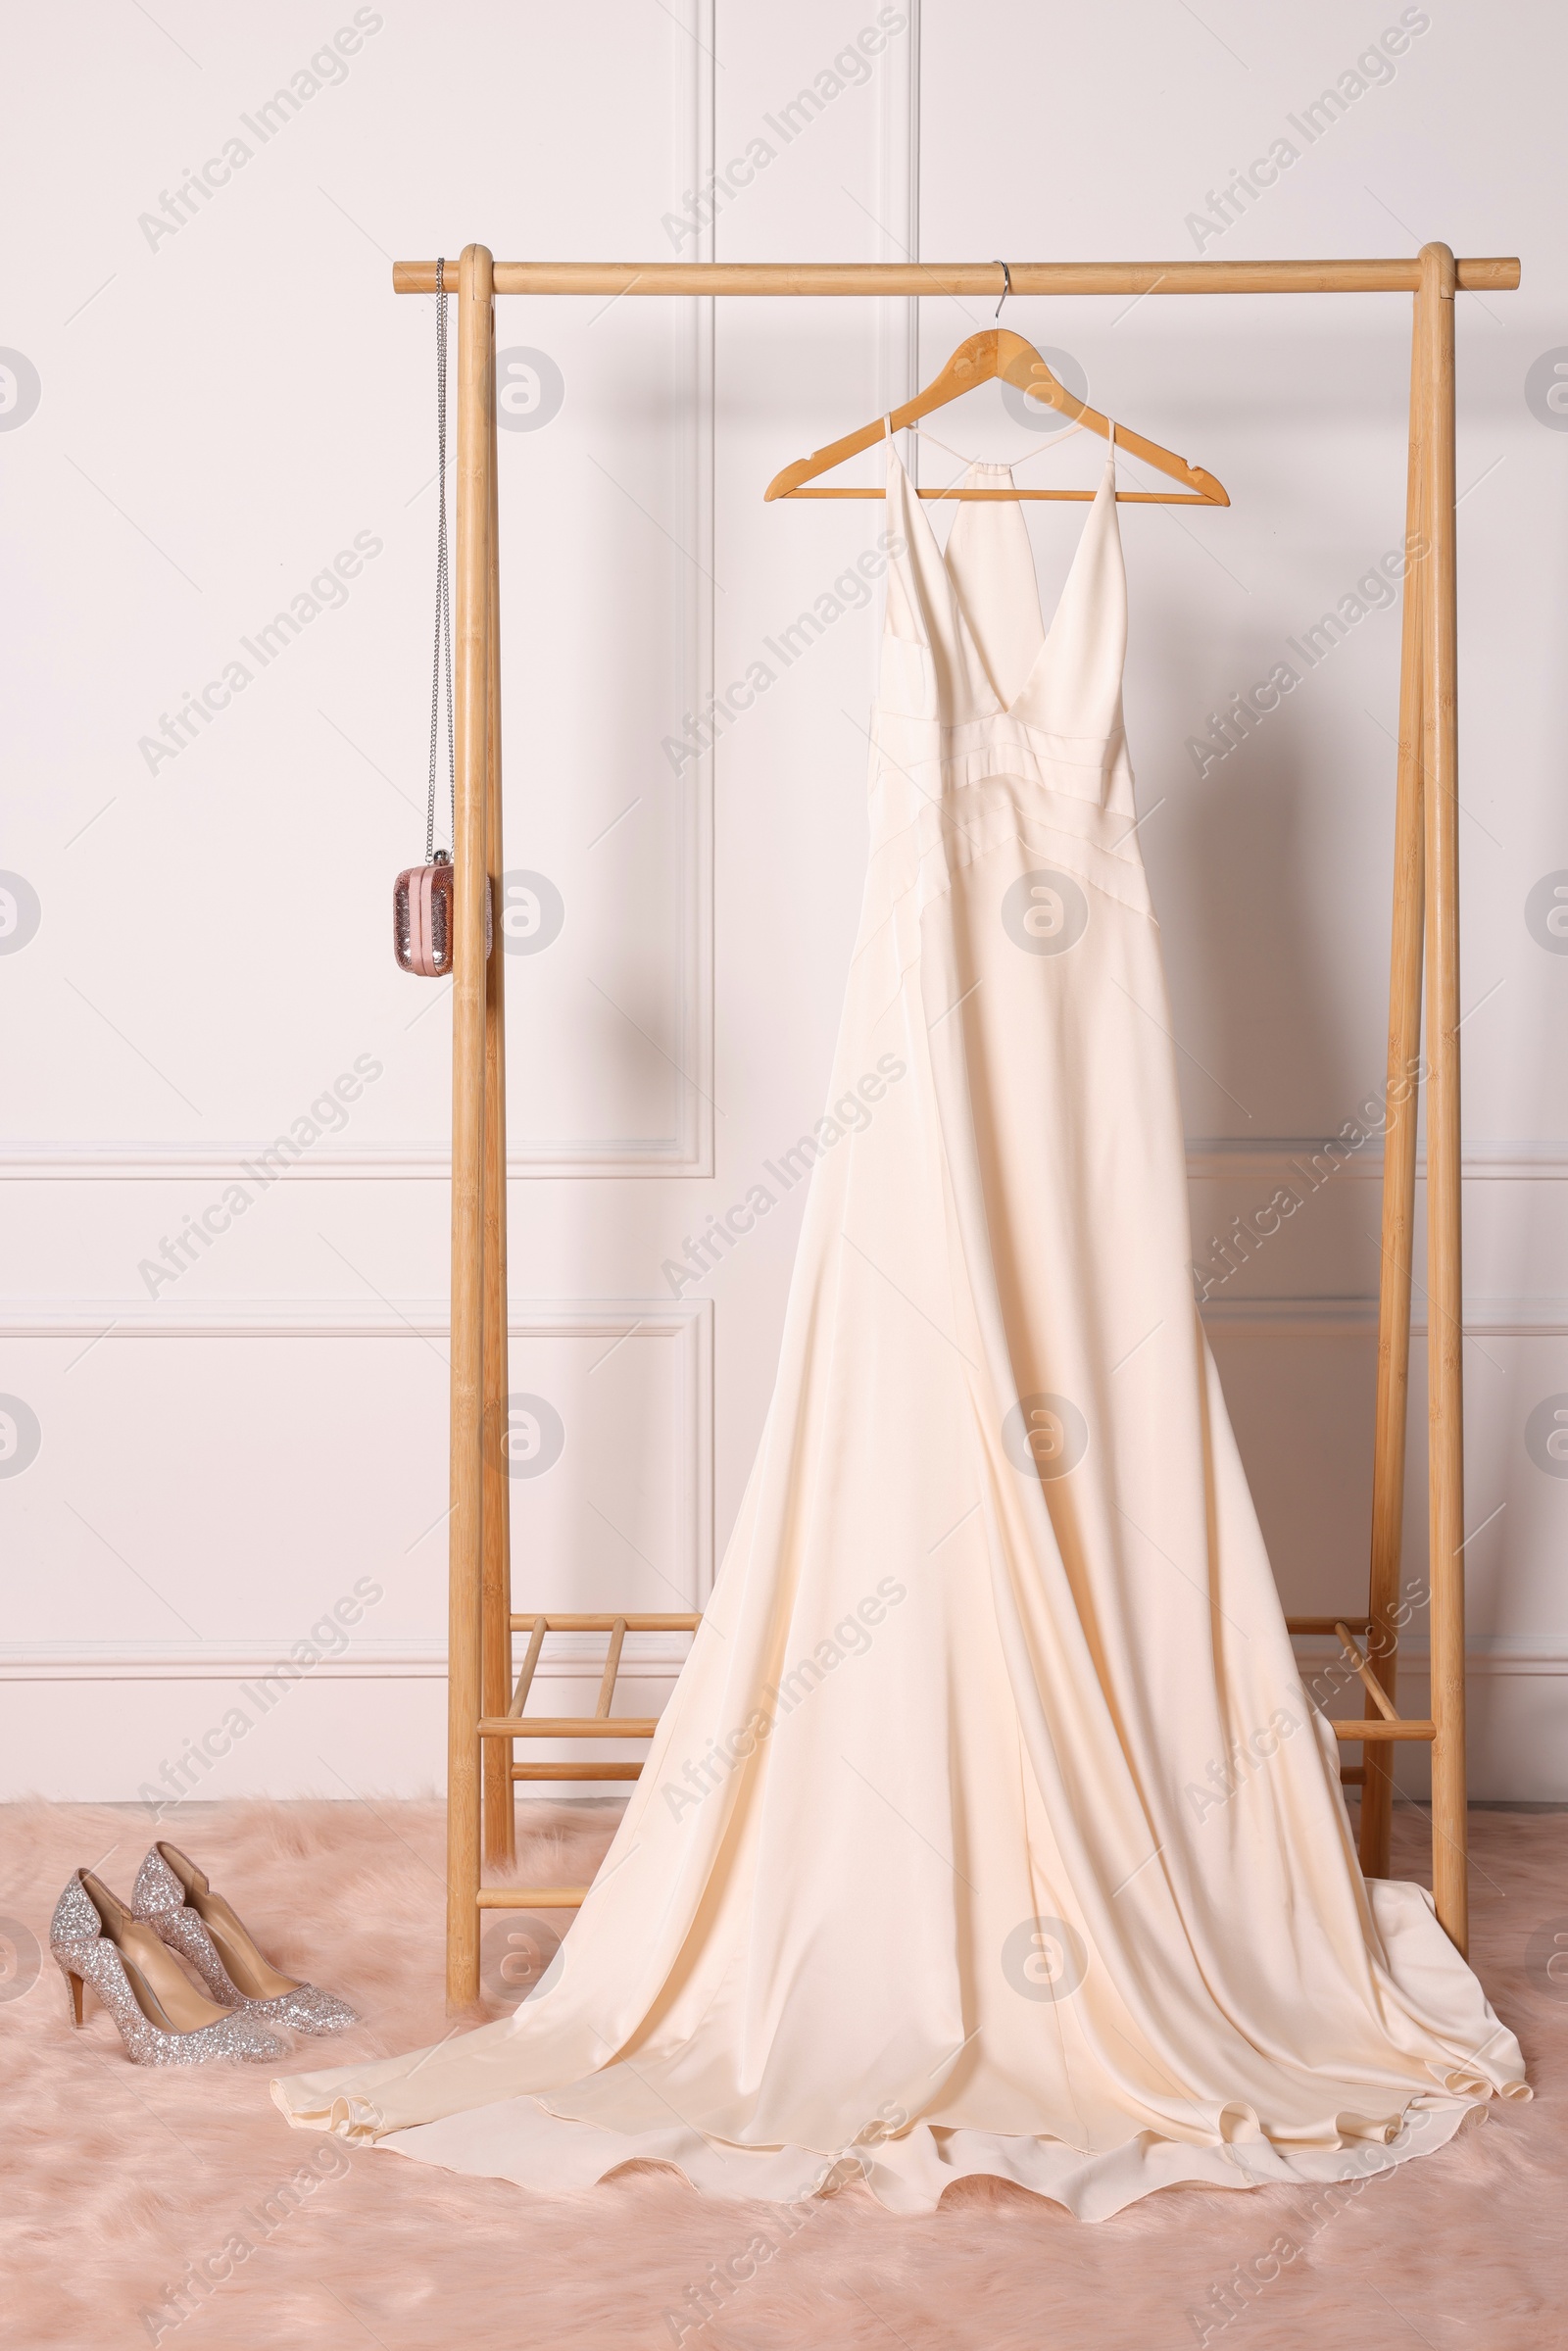 Photo of Rack with wonderful long dress, shoes and clutch in showroom. Preparing for party